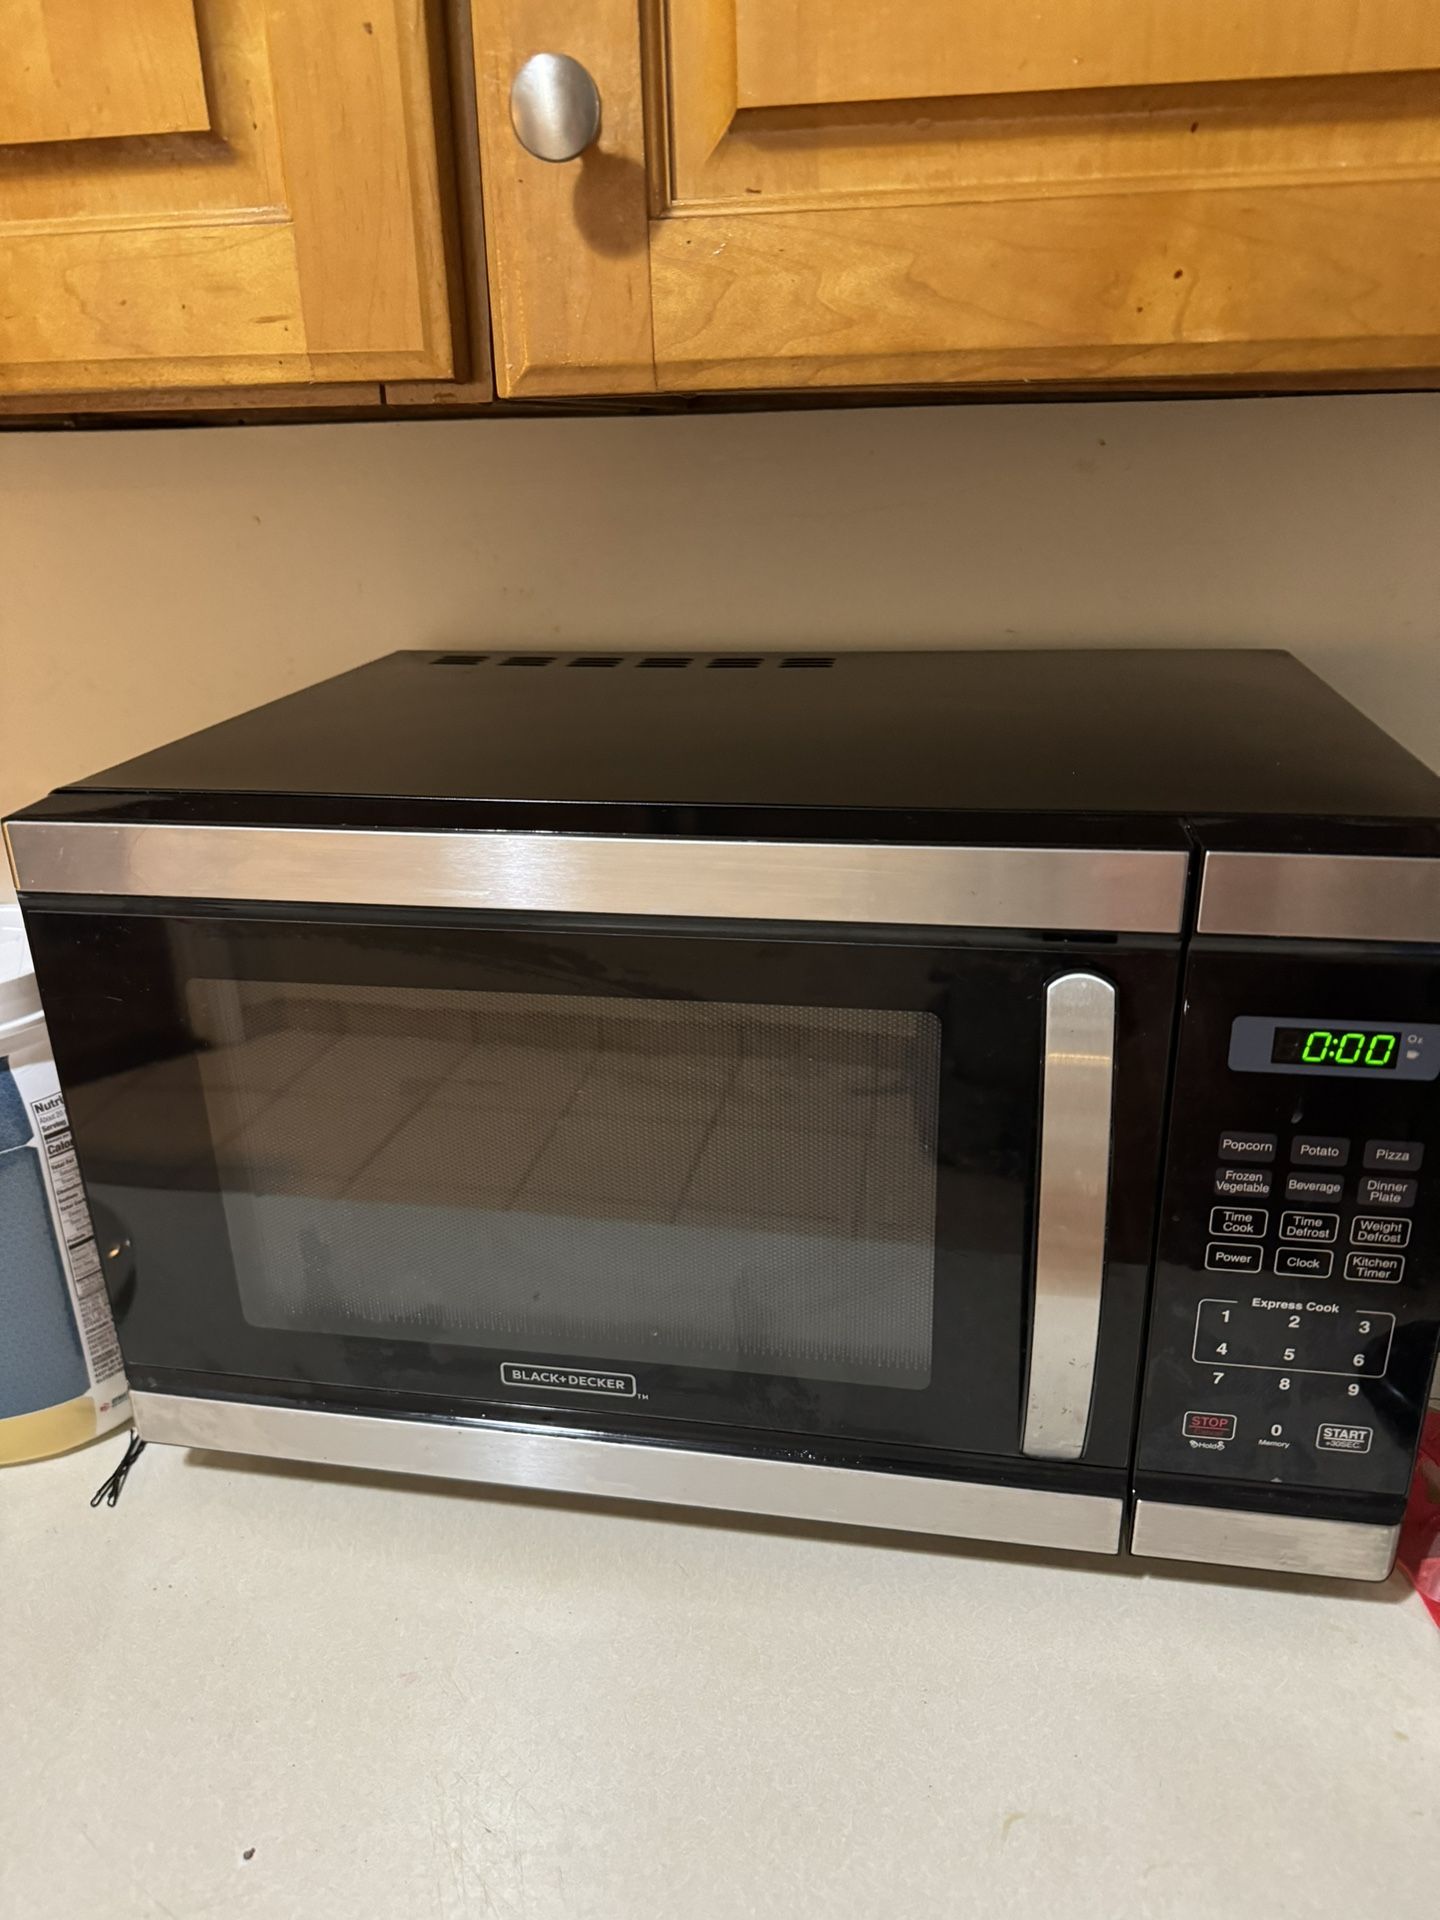 Black And Decker Microwave 